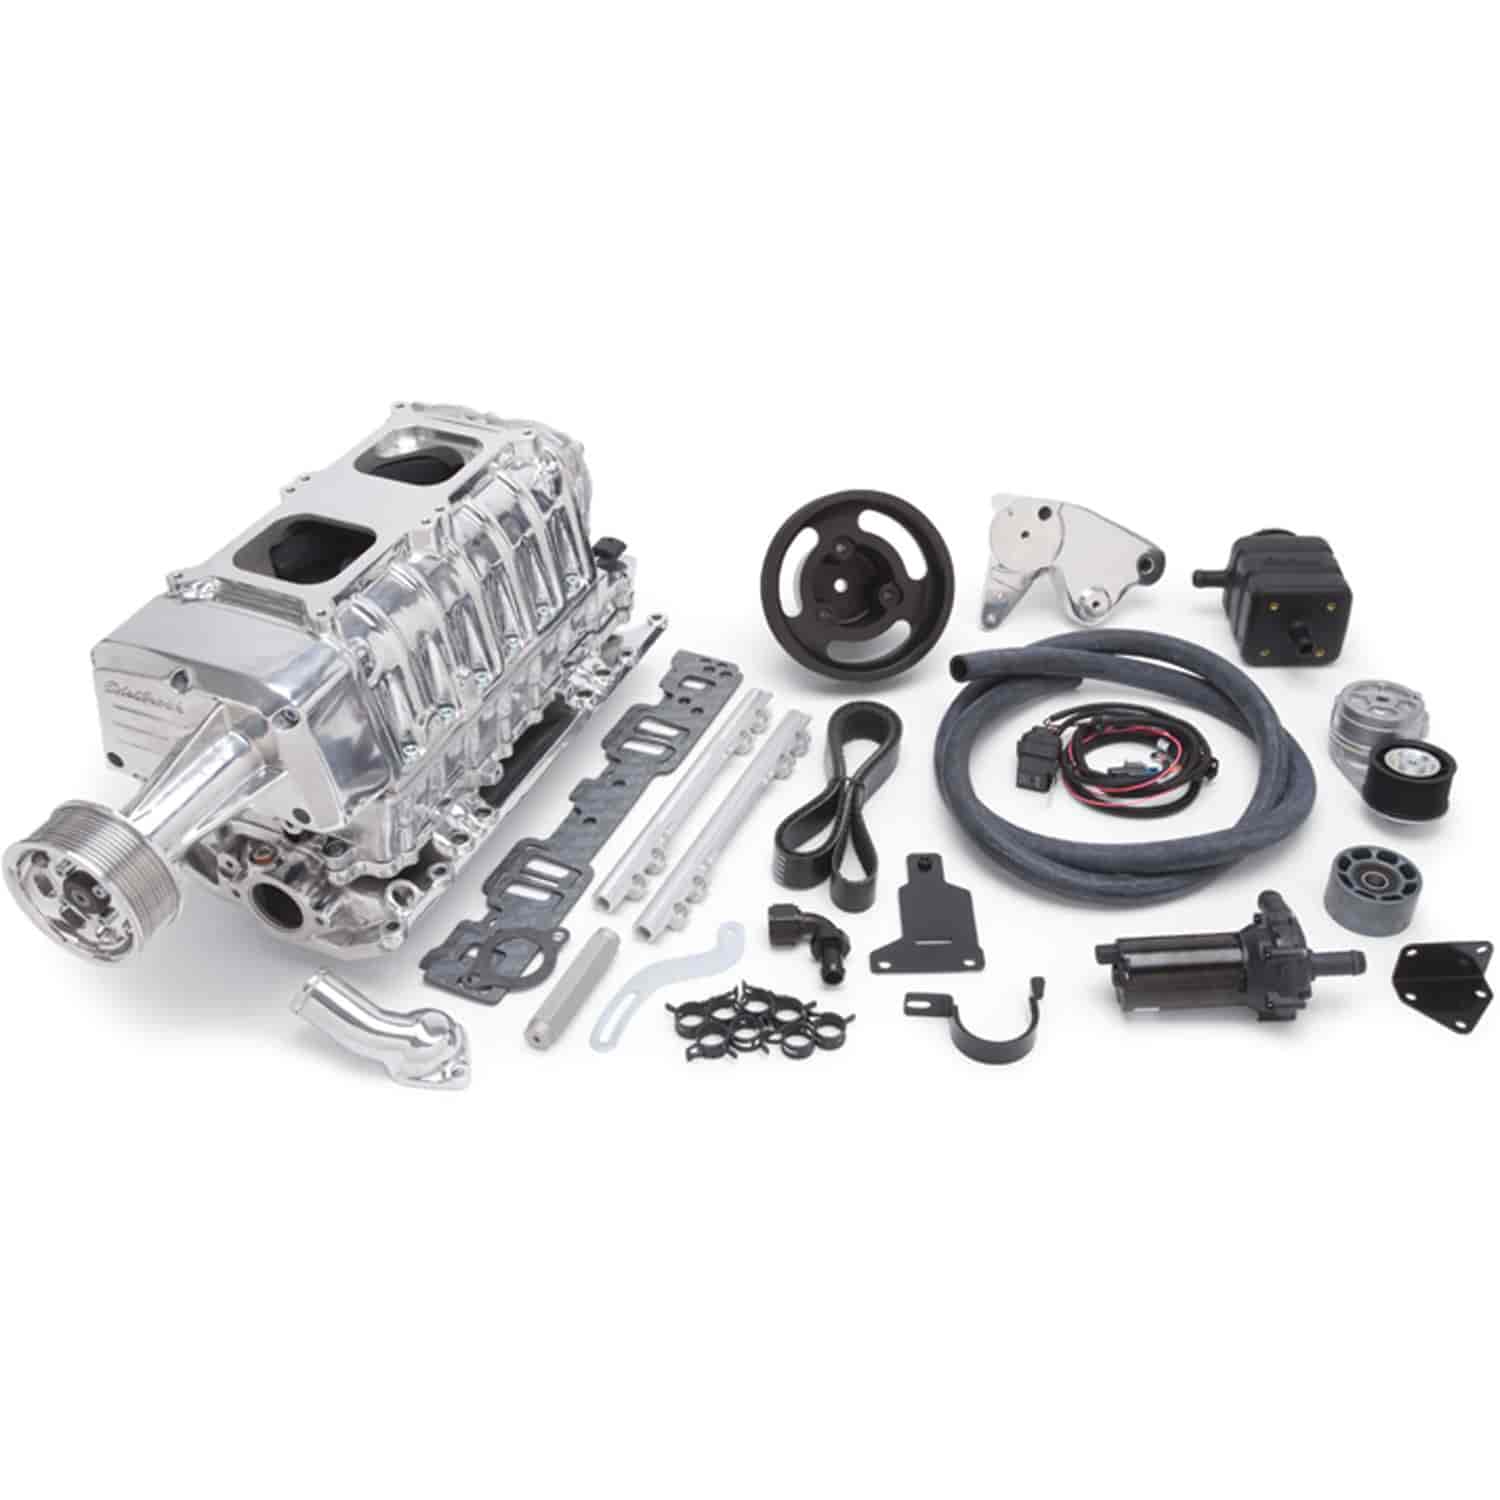 E-Force Enforcer RPM Complete EFI Polished Supercharger Kit for 1955-1986 Small Block Chevy